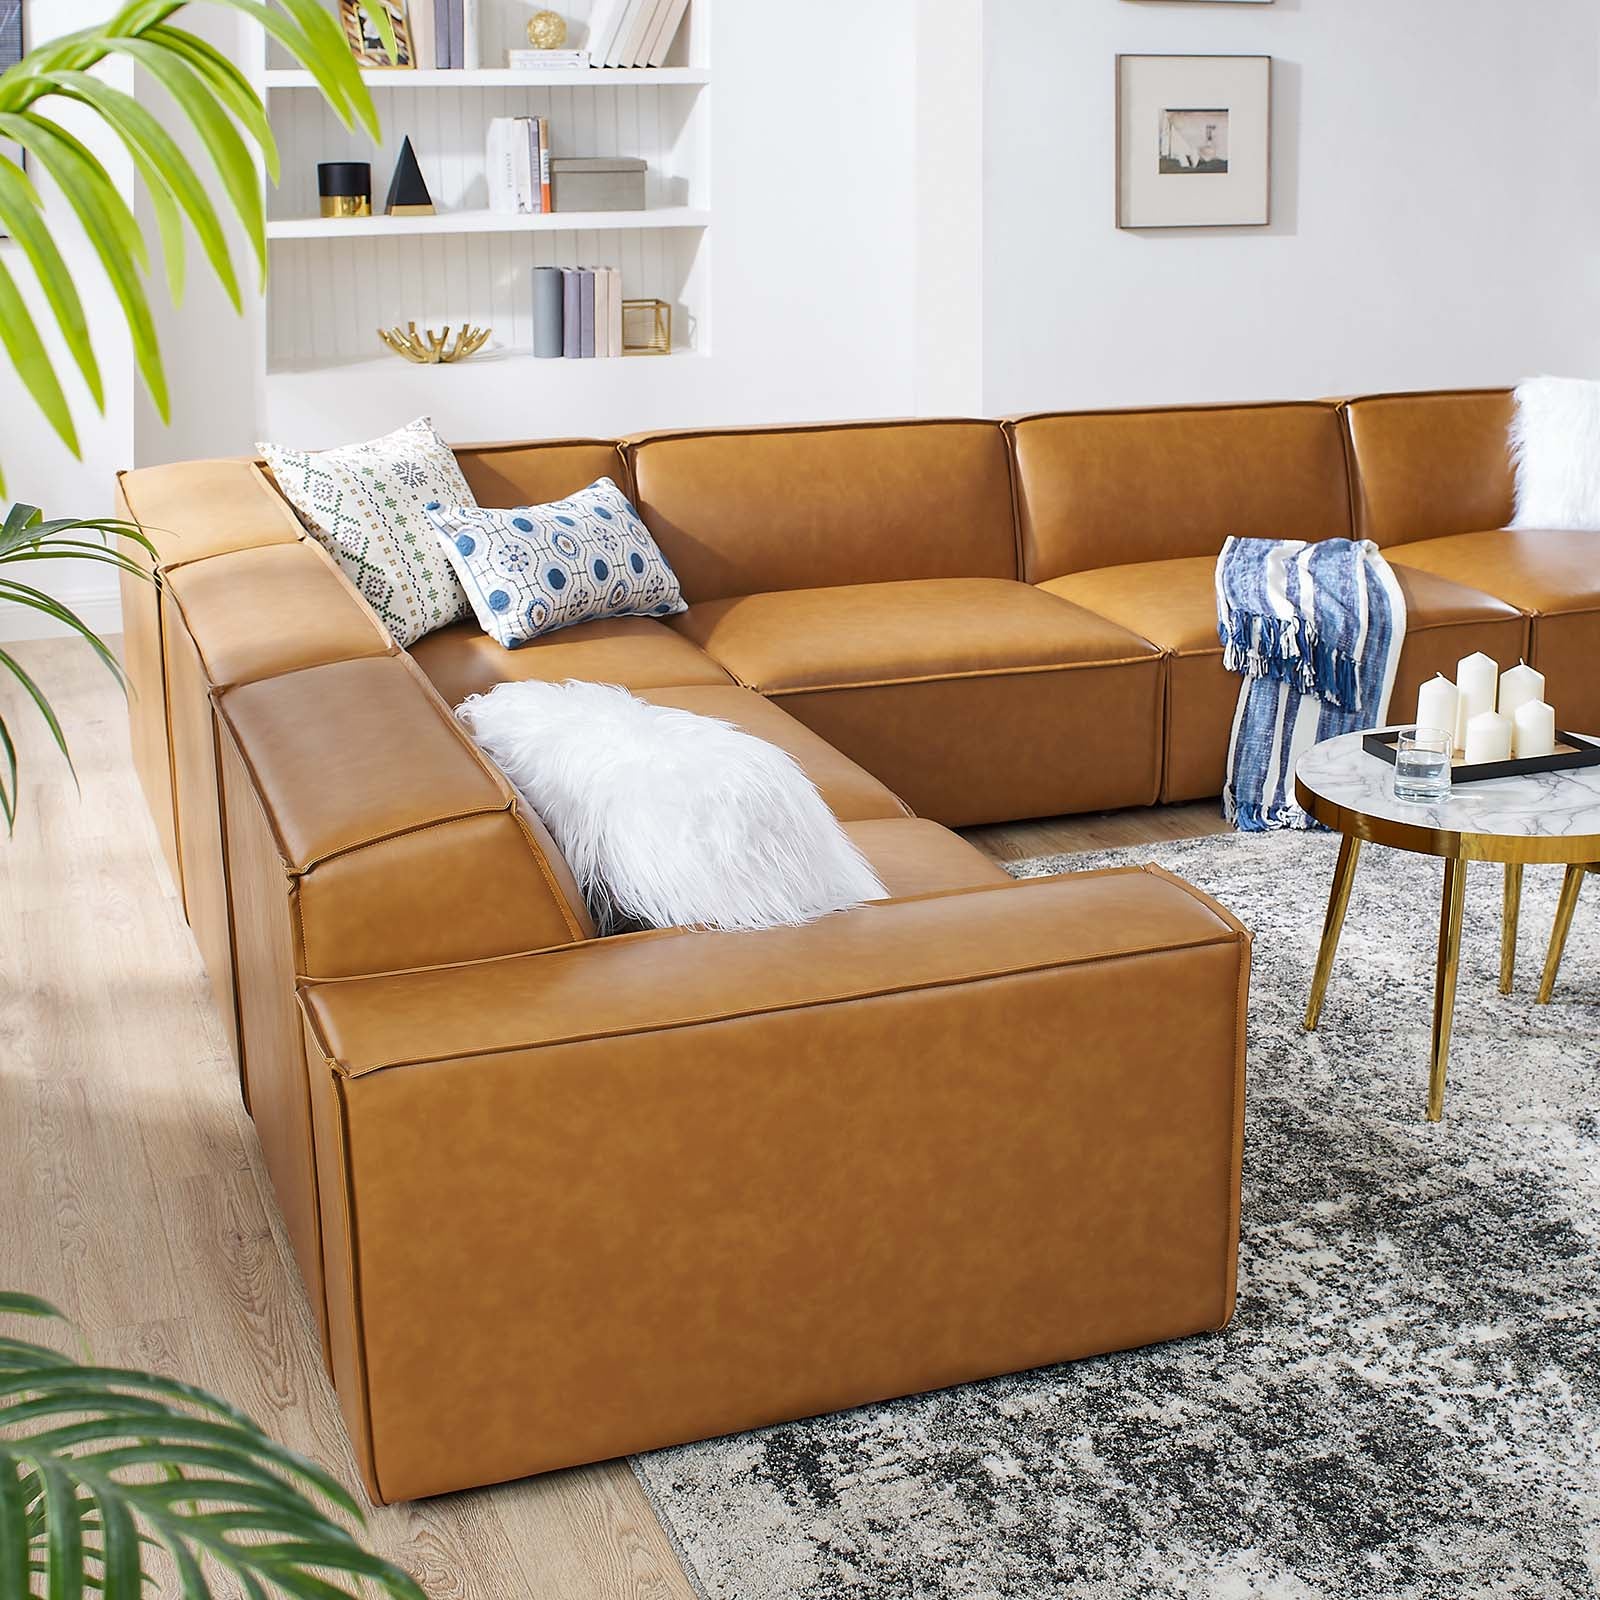 Restore 6-Piece Vegan Leather Sectional Sofa - East Shore Modern Home Furnishings